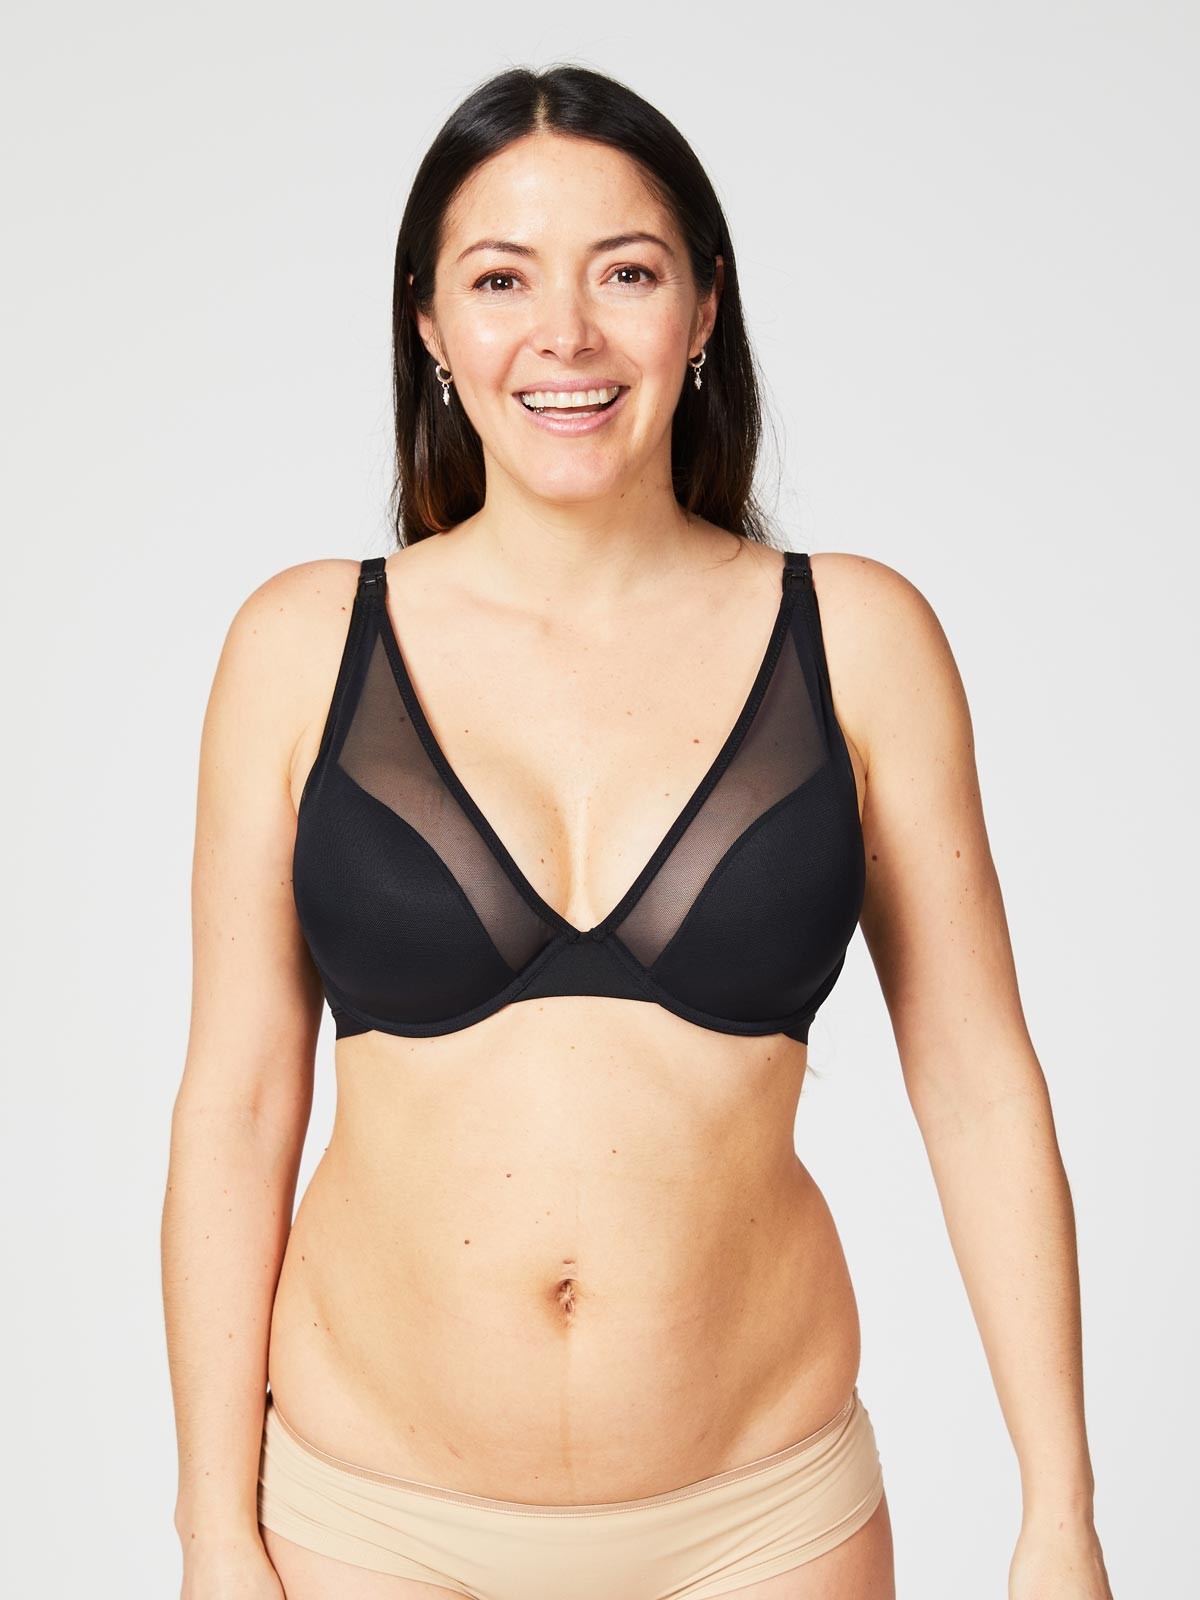 “New” ThirdLove Half Cup Bra Sizes Are Nothing New